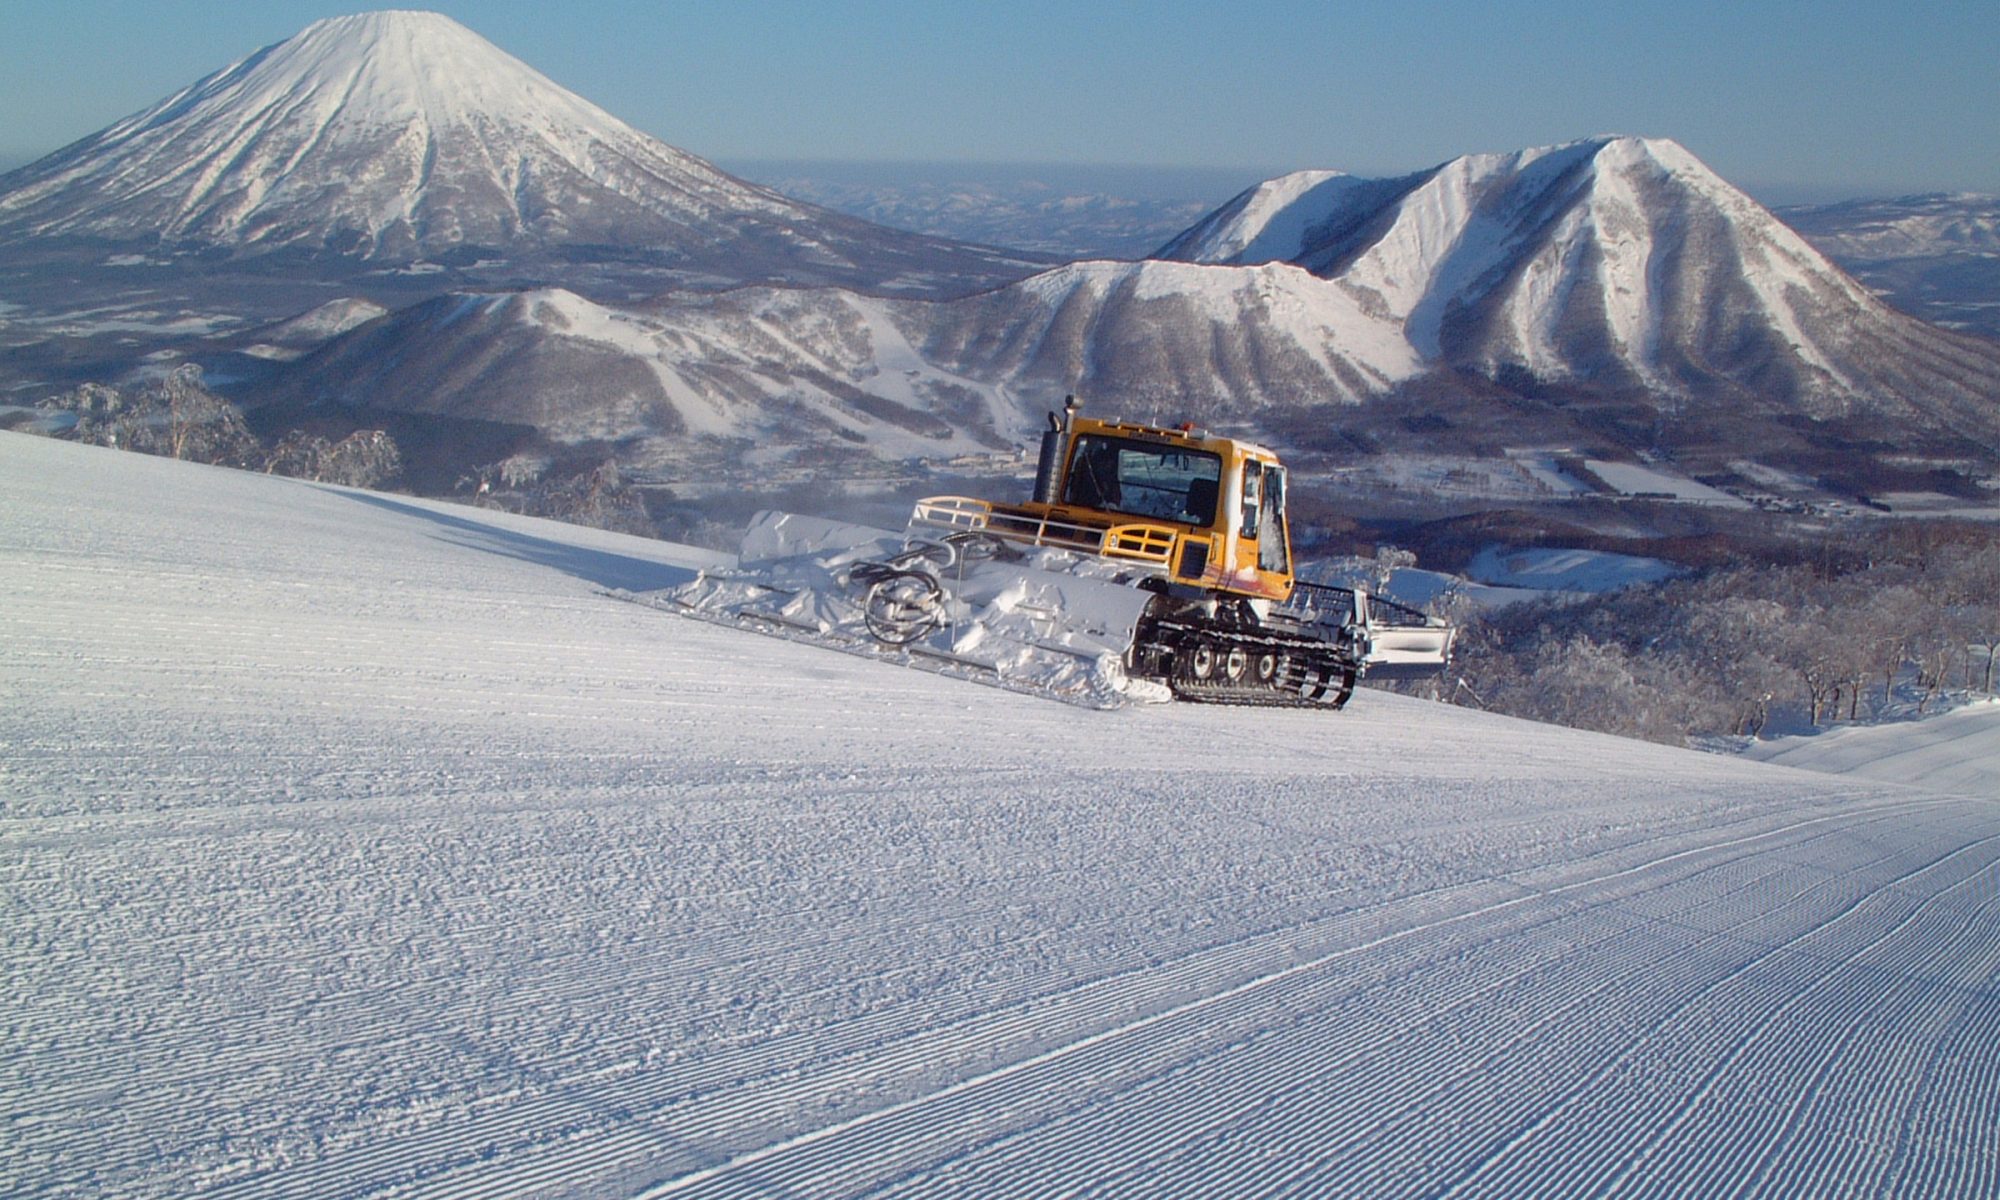 Rusutsu will be EPIC for the 2019-20 ski season. Rusutsu, the Japanese Resort joins the EPIC Pass for the 2019-20 ski season. Photo: Rusutsu Resort.